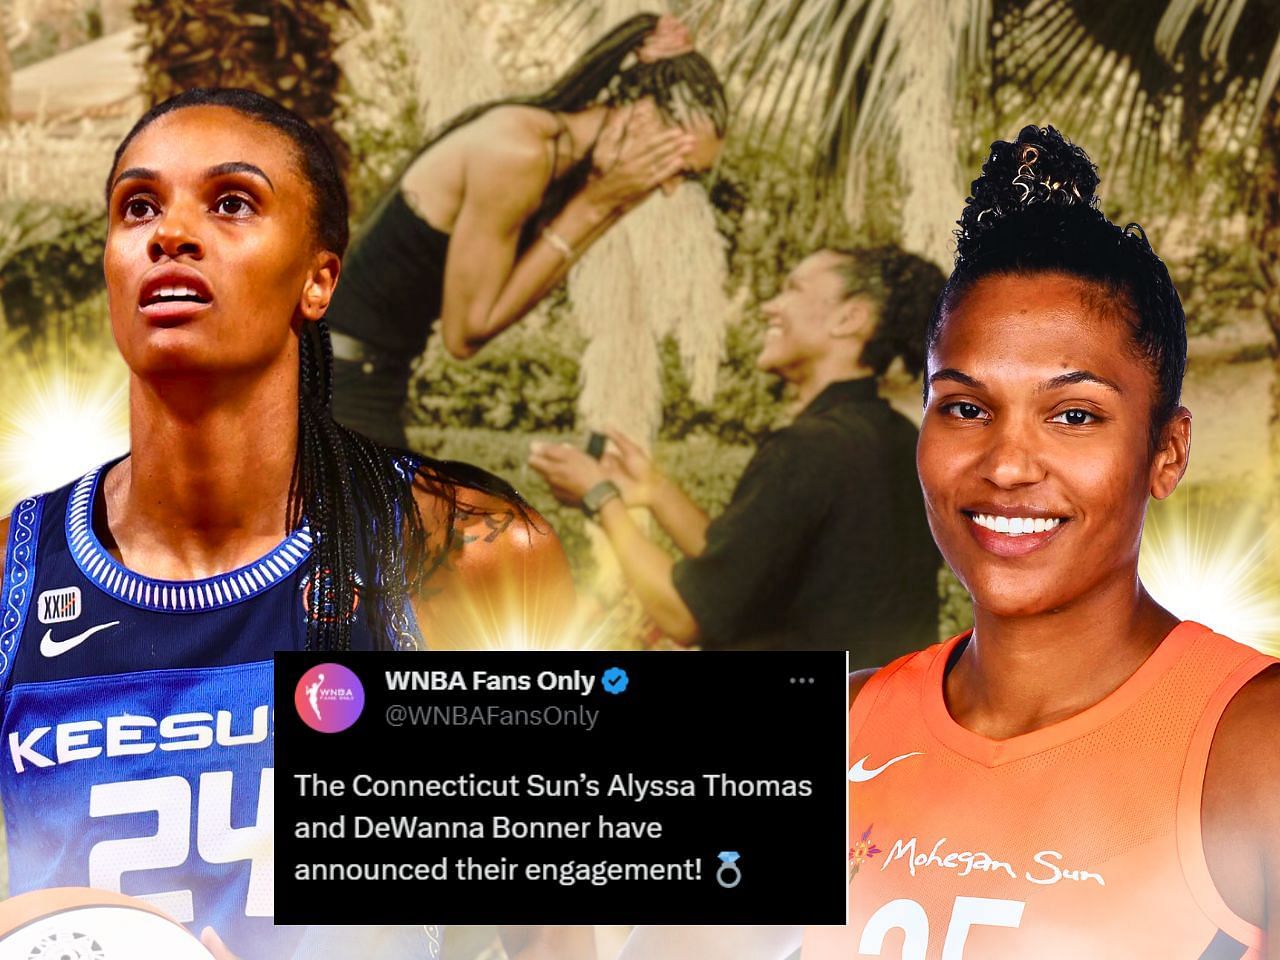 Looking at WNBA All-Stars DeWanna Bonner and Alyssa Thomas after their engagement